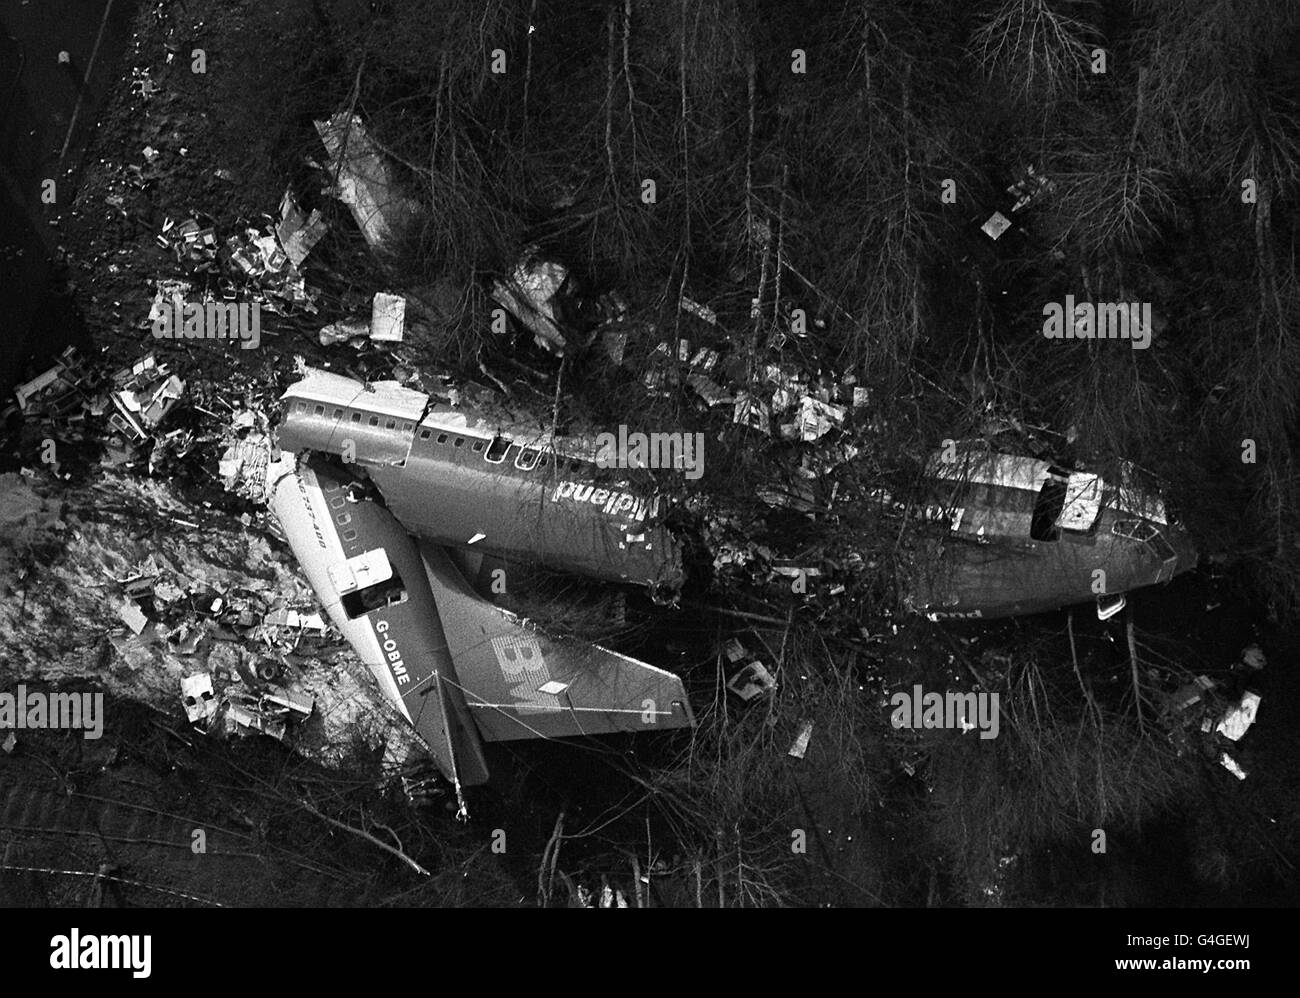 An aerial view of the shattered remains of the British Midlands 737 400 aeroplane, Flight BD92, which crashed on the M1 motorway embankment, near Kegworth, Leicestershire, killing 47 people. 8/1/99 10th anniversary of the crash. Stock Photo